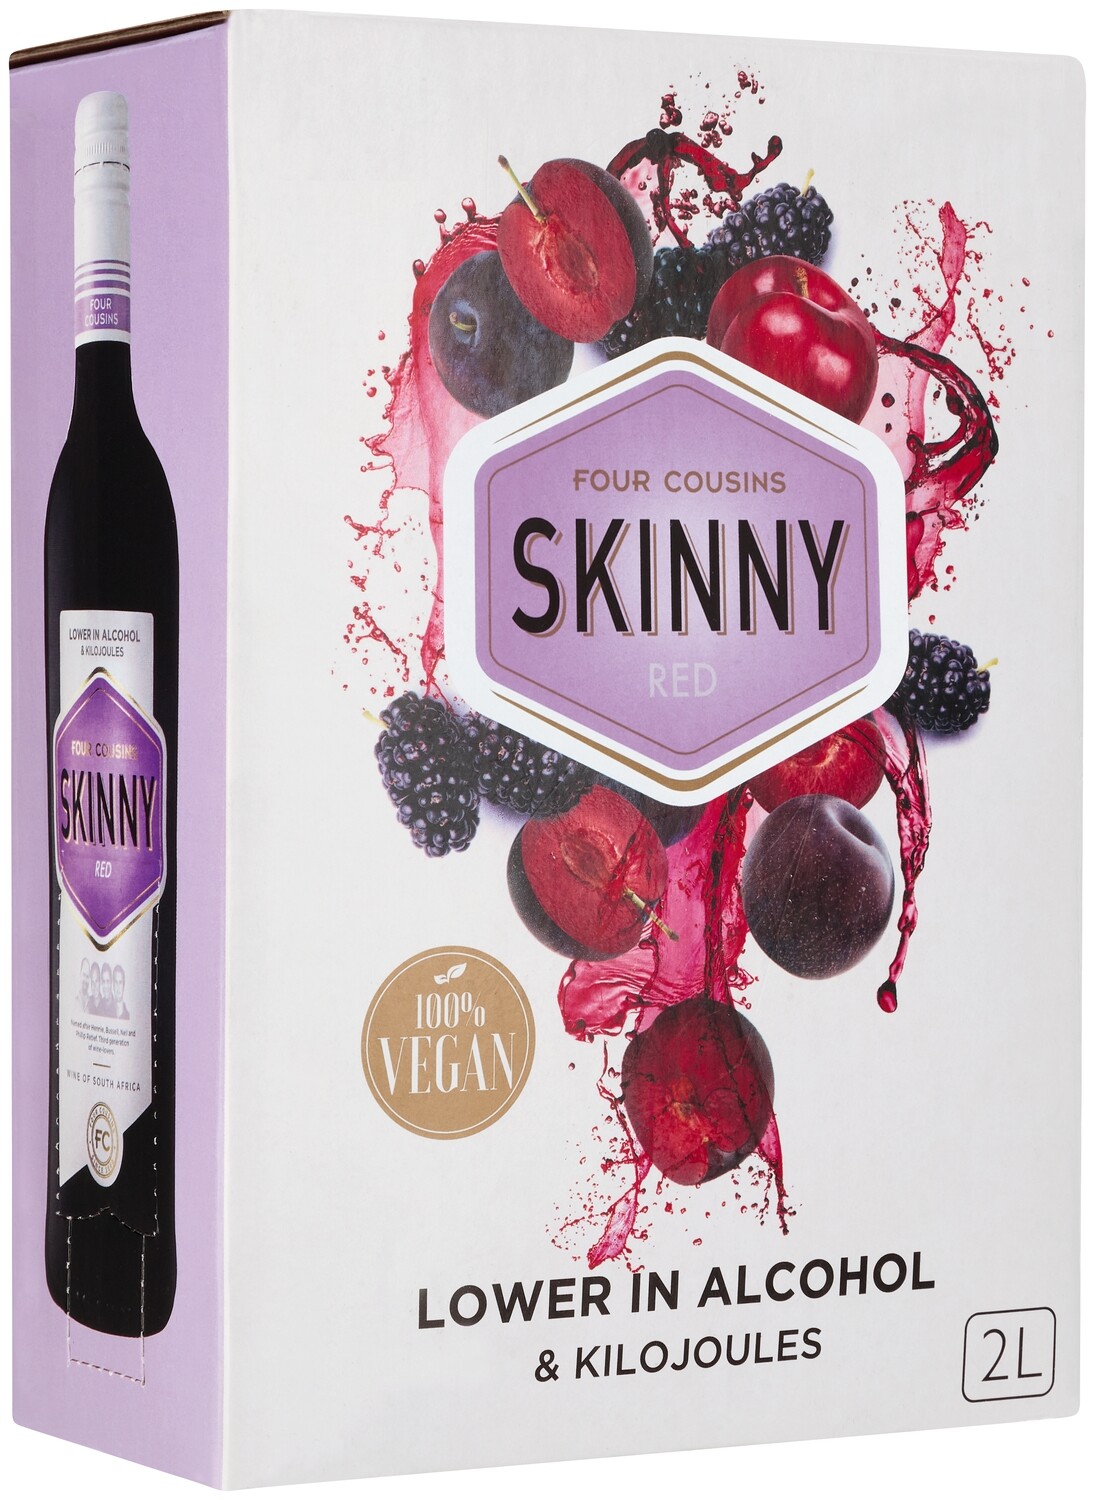 FOUR COUSINS SKINNY RED - 6 x 2L